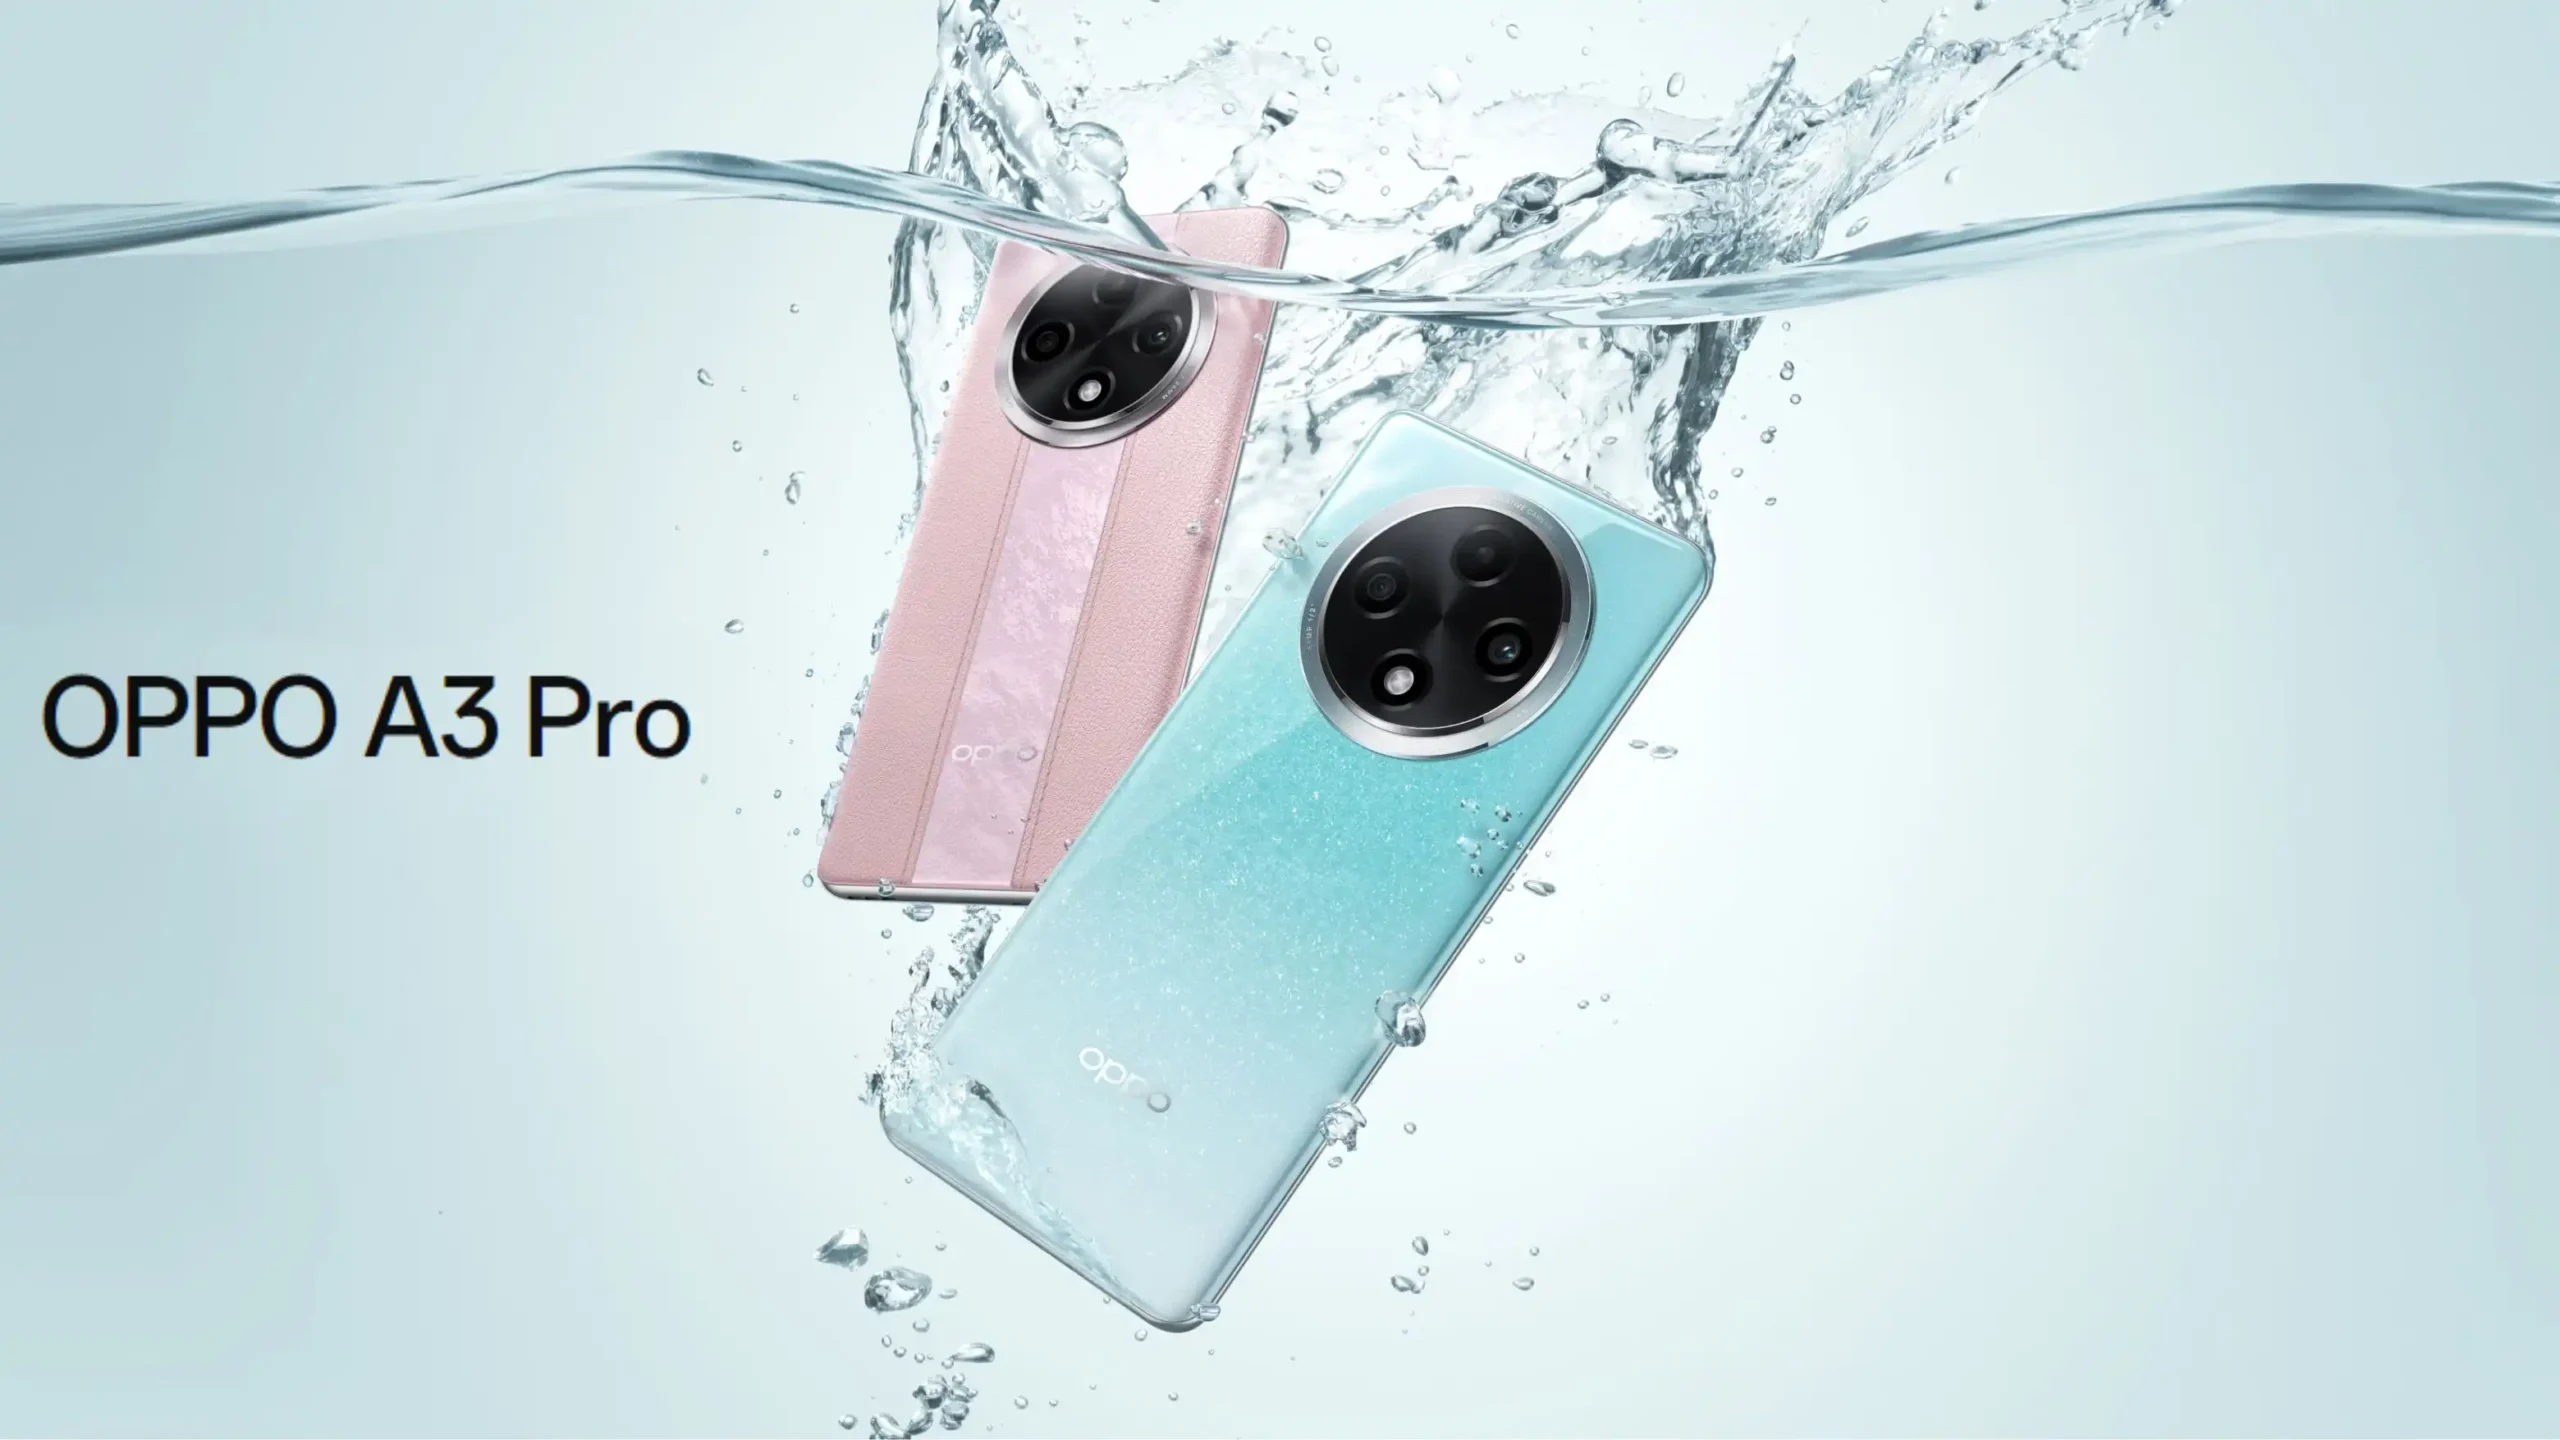 OPPO A3 Pro Review - Launch Date, Price, and Specs